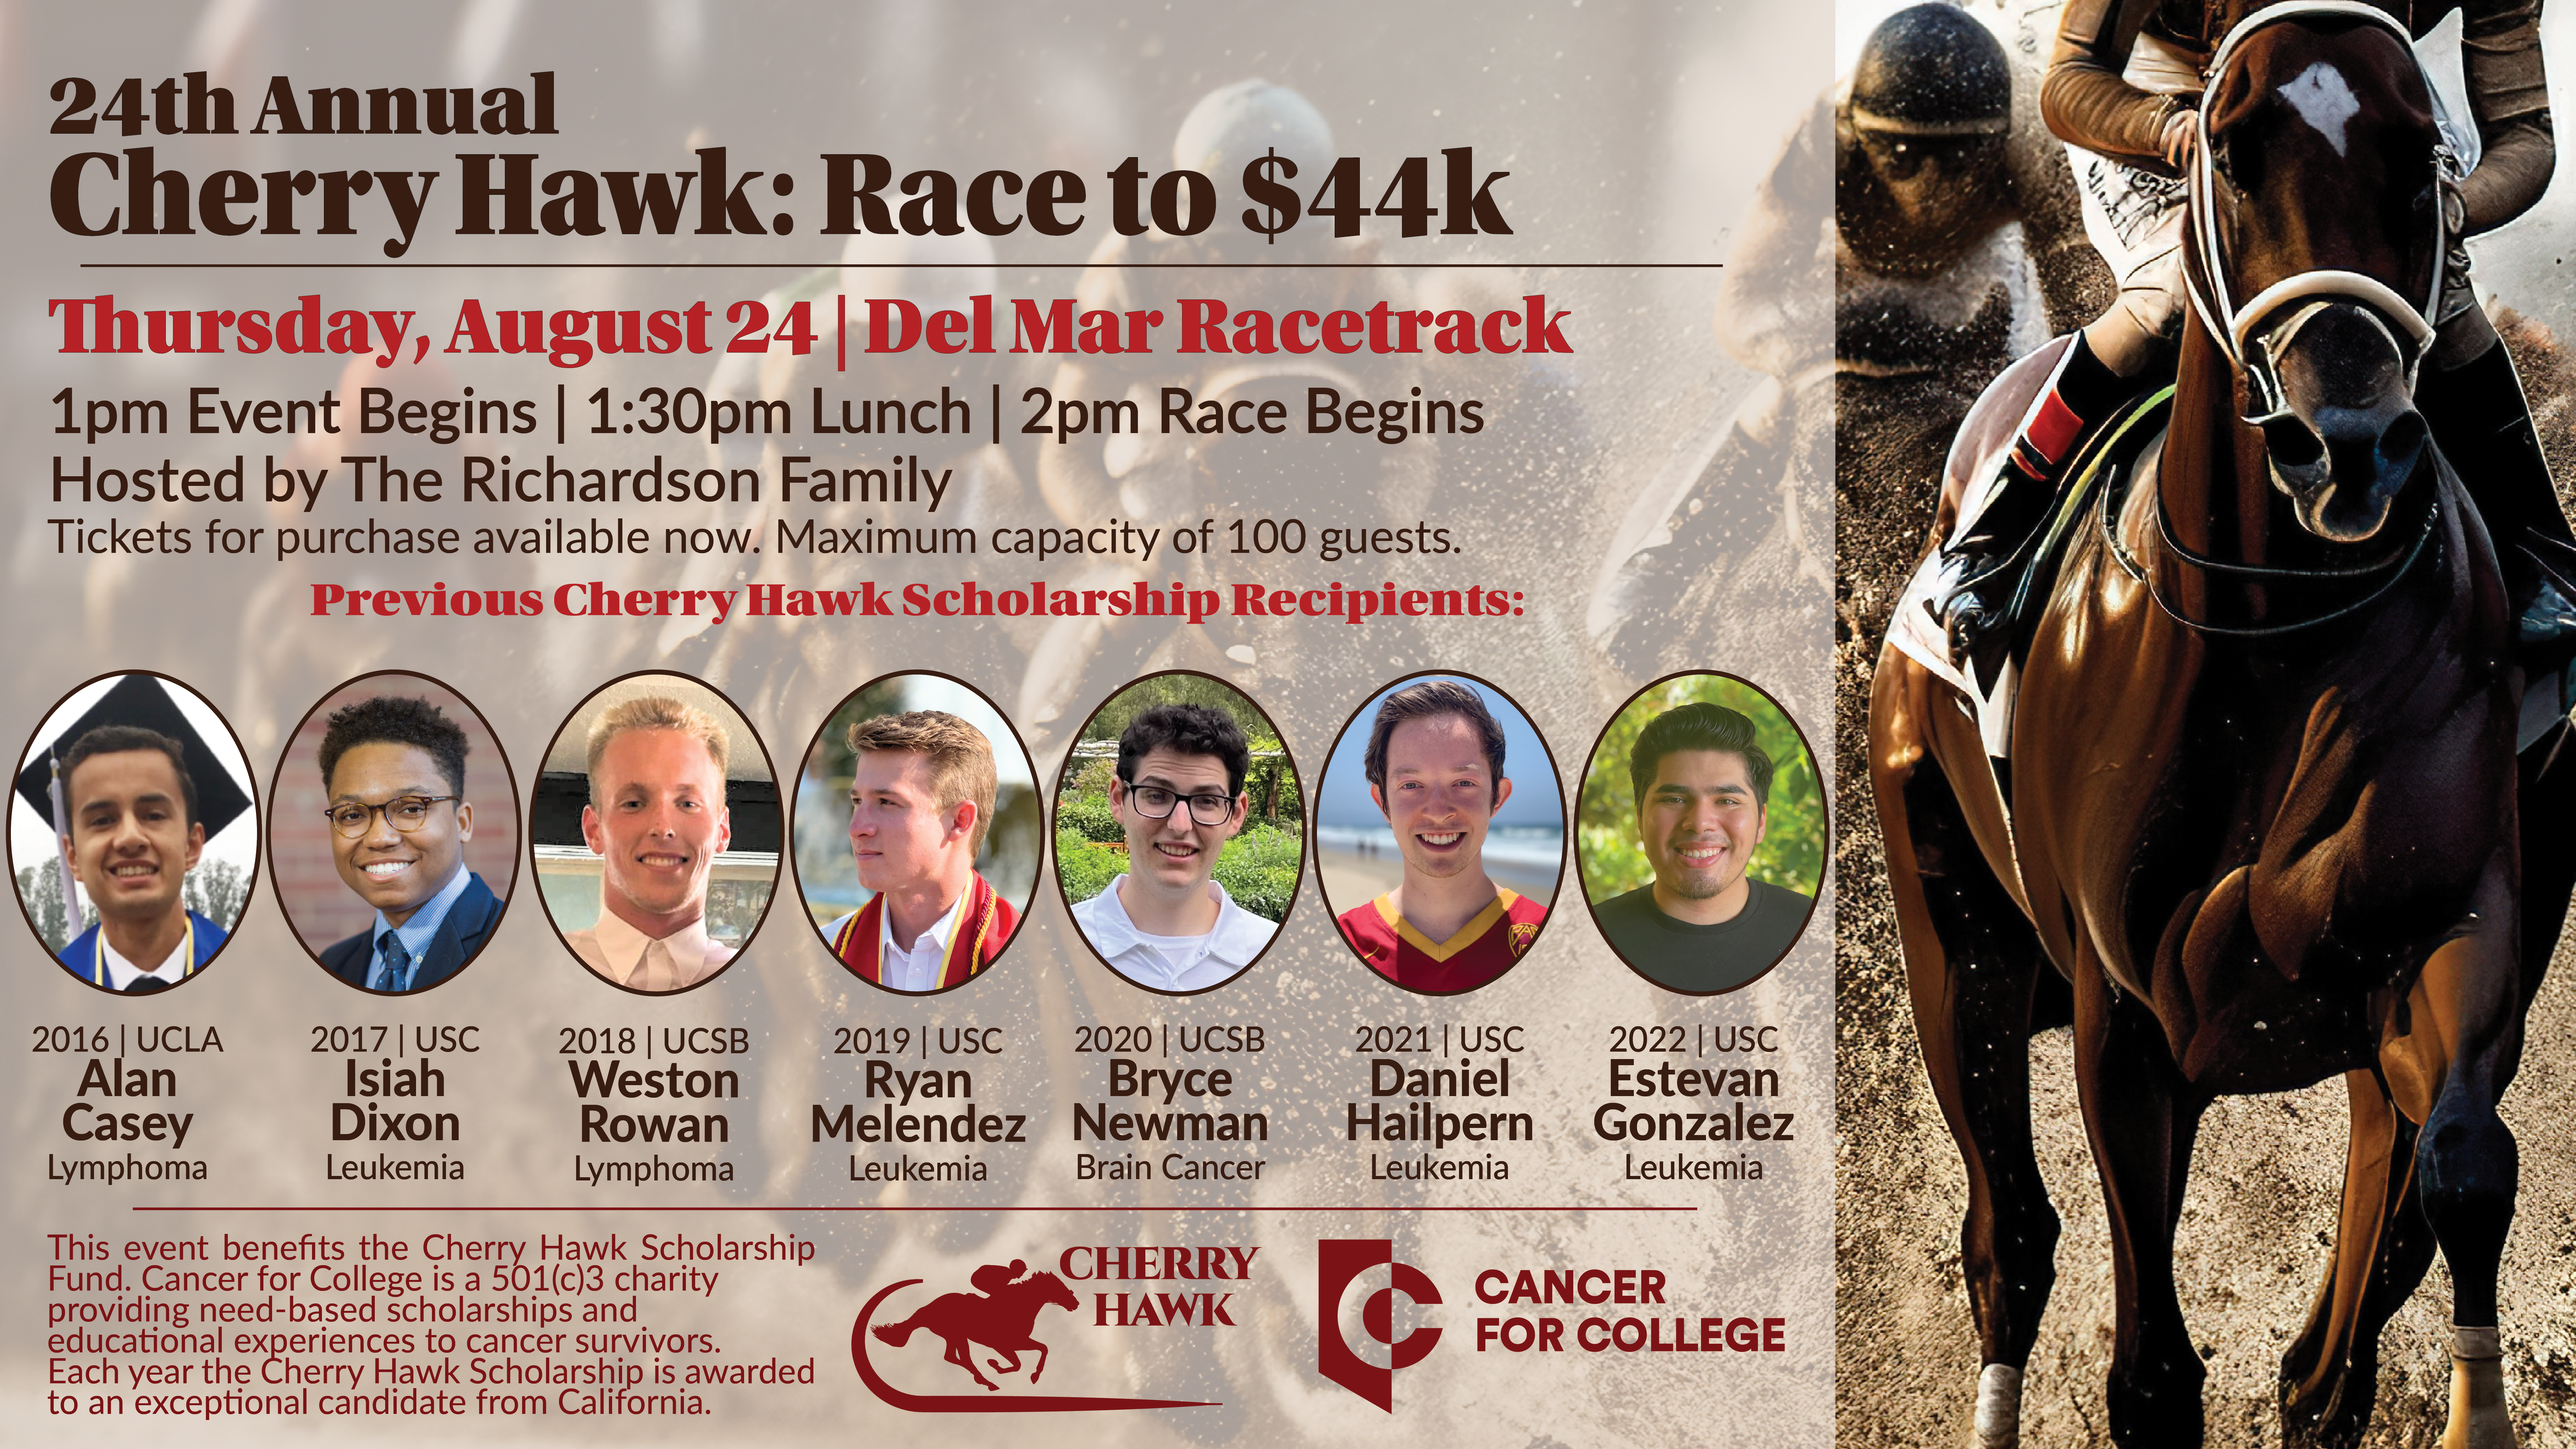 Ad for Cherry Hawk event on August 24 at Del Mar Racetrack